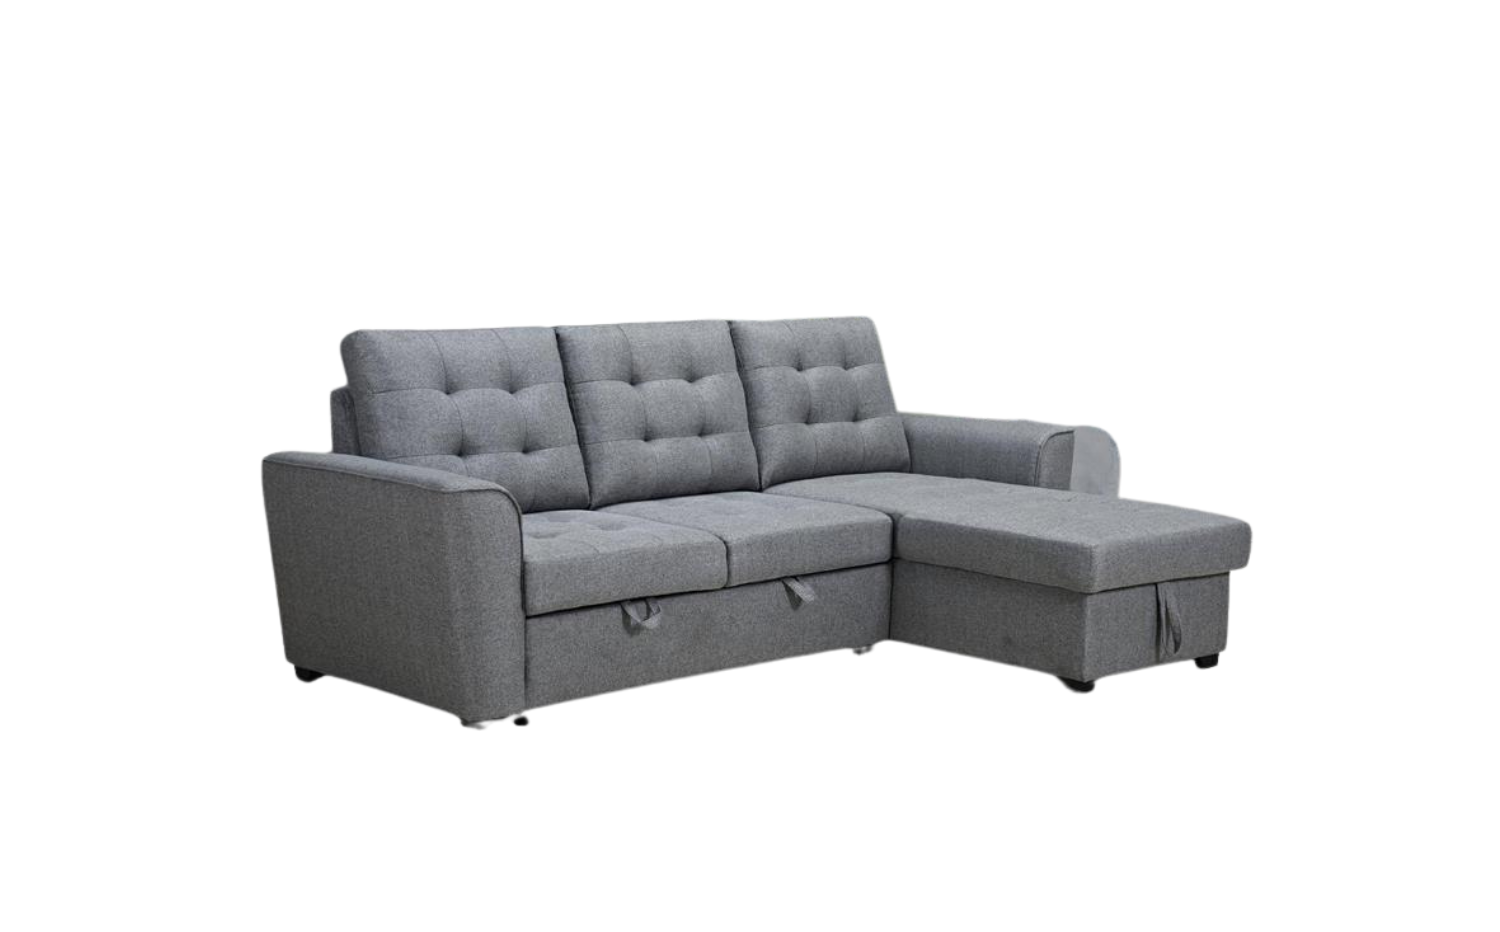 2 Seater Fabric Pull Out Sofa Bed With Reversible Storage Chaise - Grey